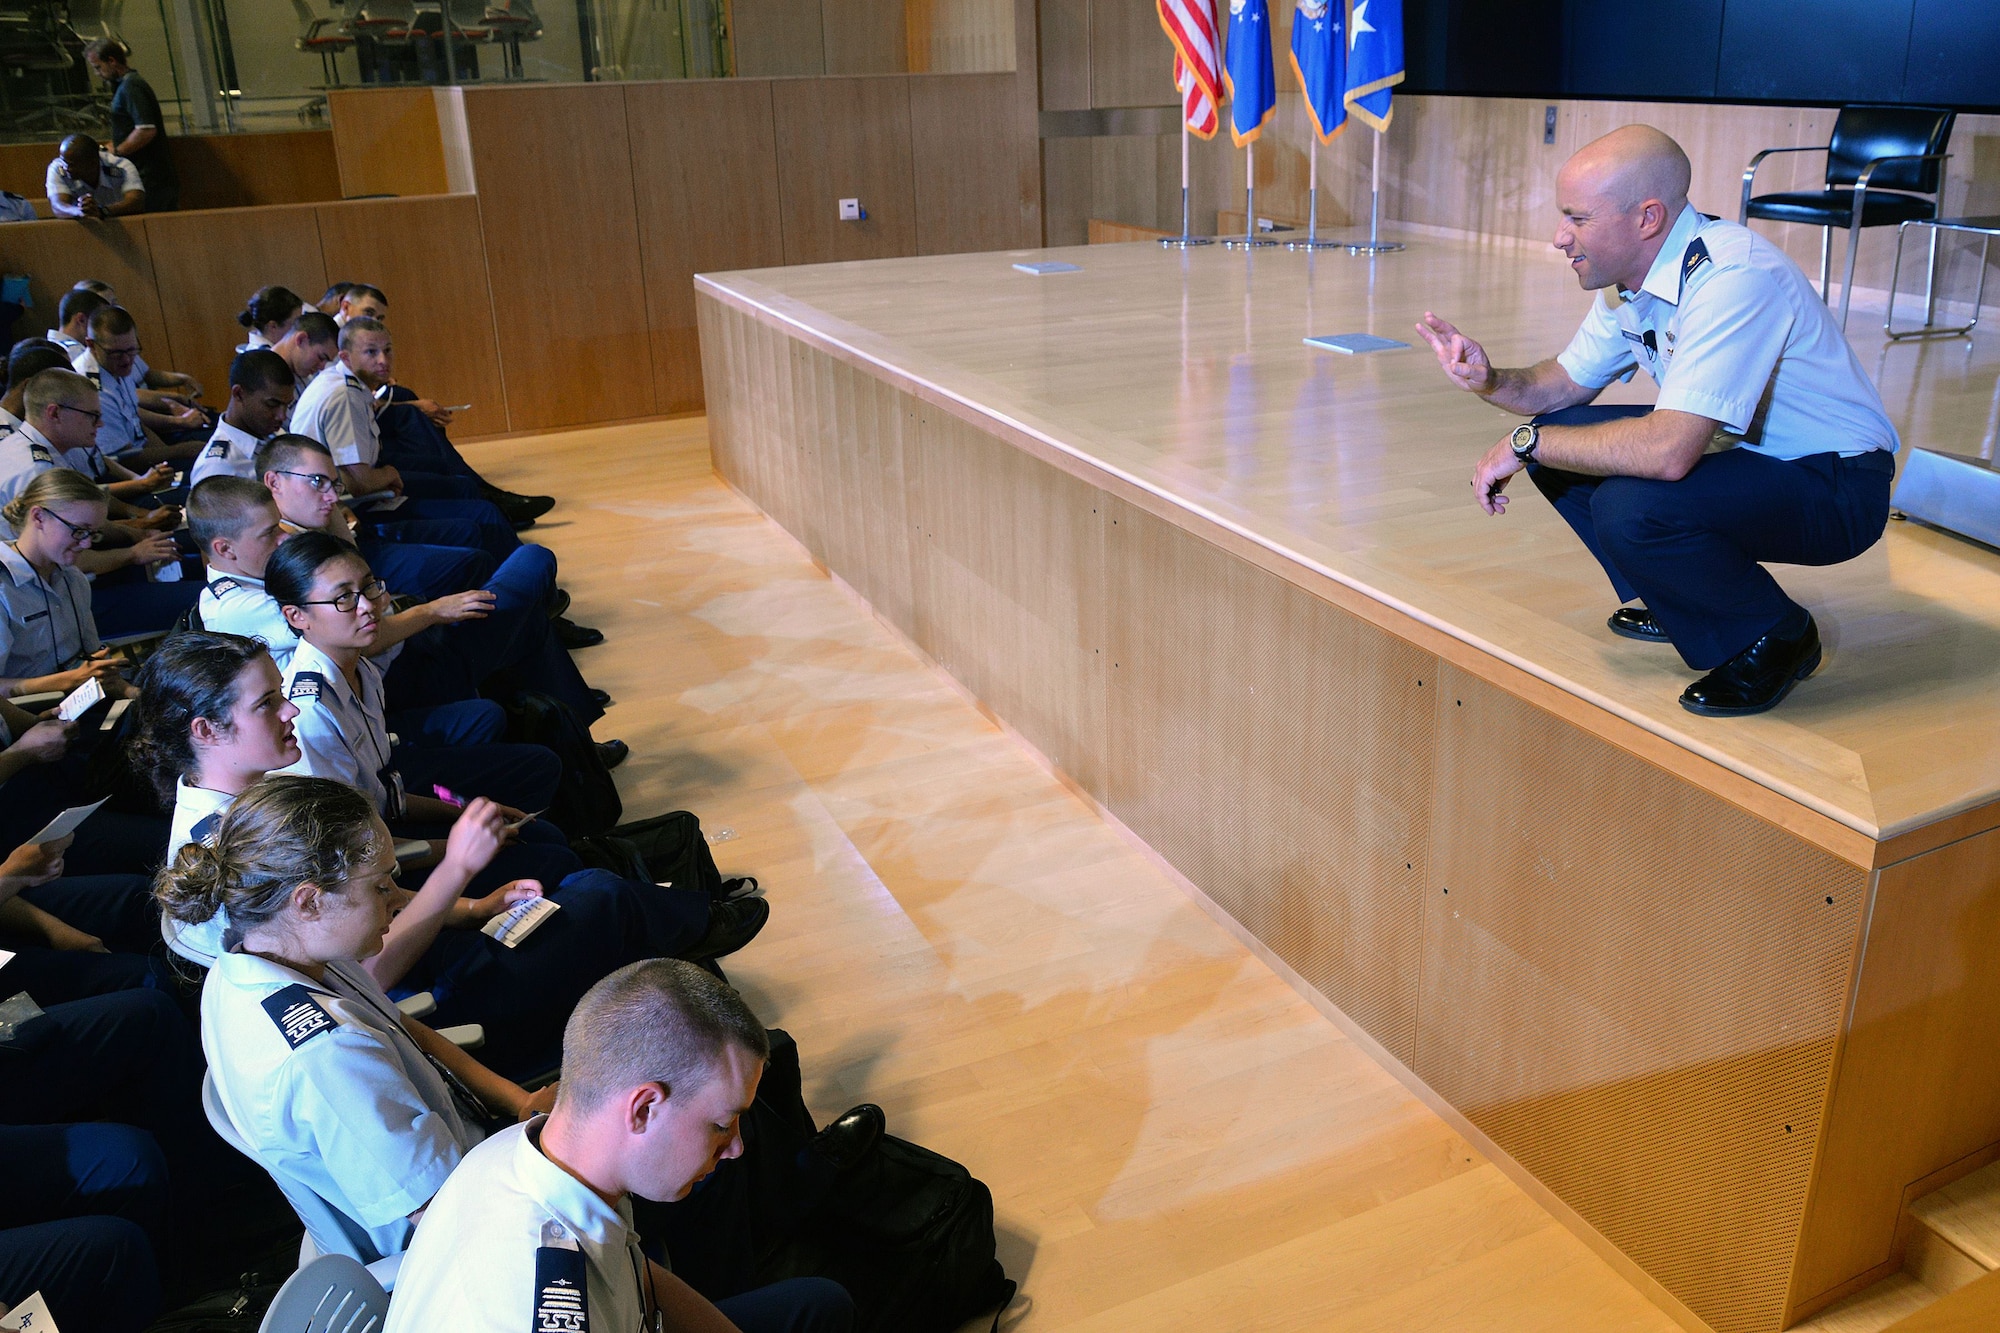 Lt. Col. Robert Marshall, right, Center for Character and Leadership Development director for experiential education programs and honor education, speaks with cadets Aug. 7, 2017, at the U.S. Air Force Academy, Colo. Marshall is currently developing a summer program that encourages cadets to learn and overcome challenges, risk, and failure that can't be replicated in a classroom via outdoor experiences. (Courtesy photo)